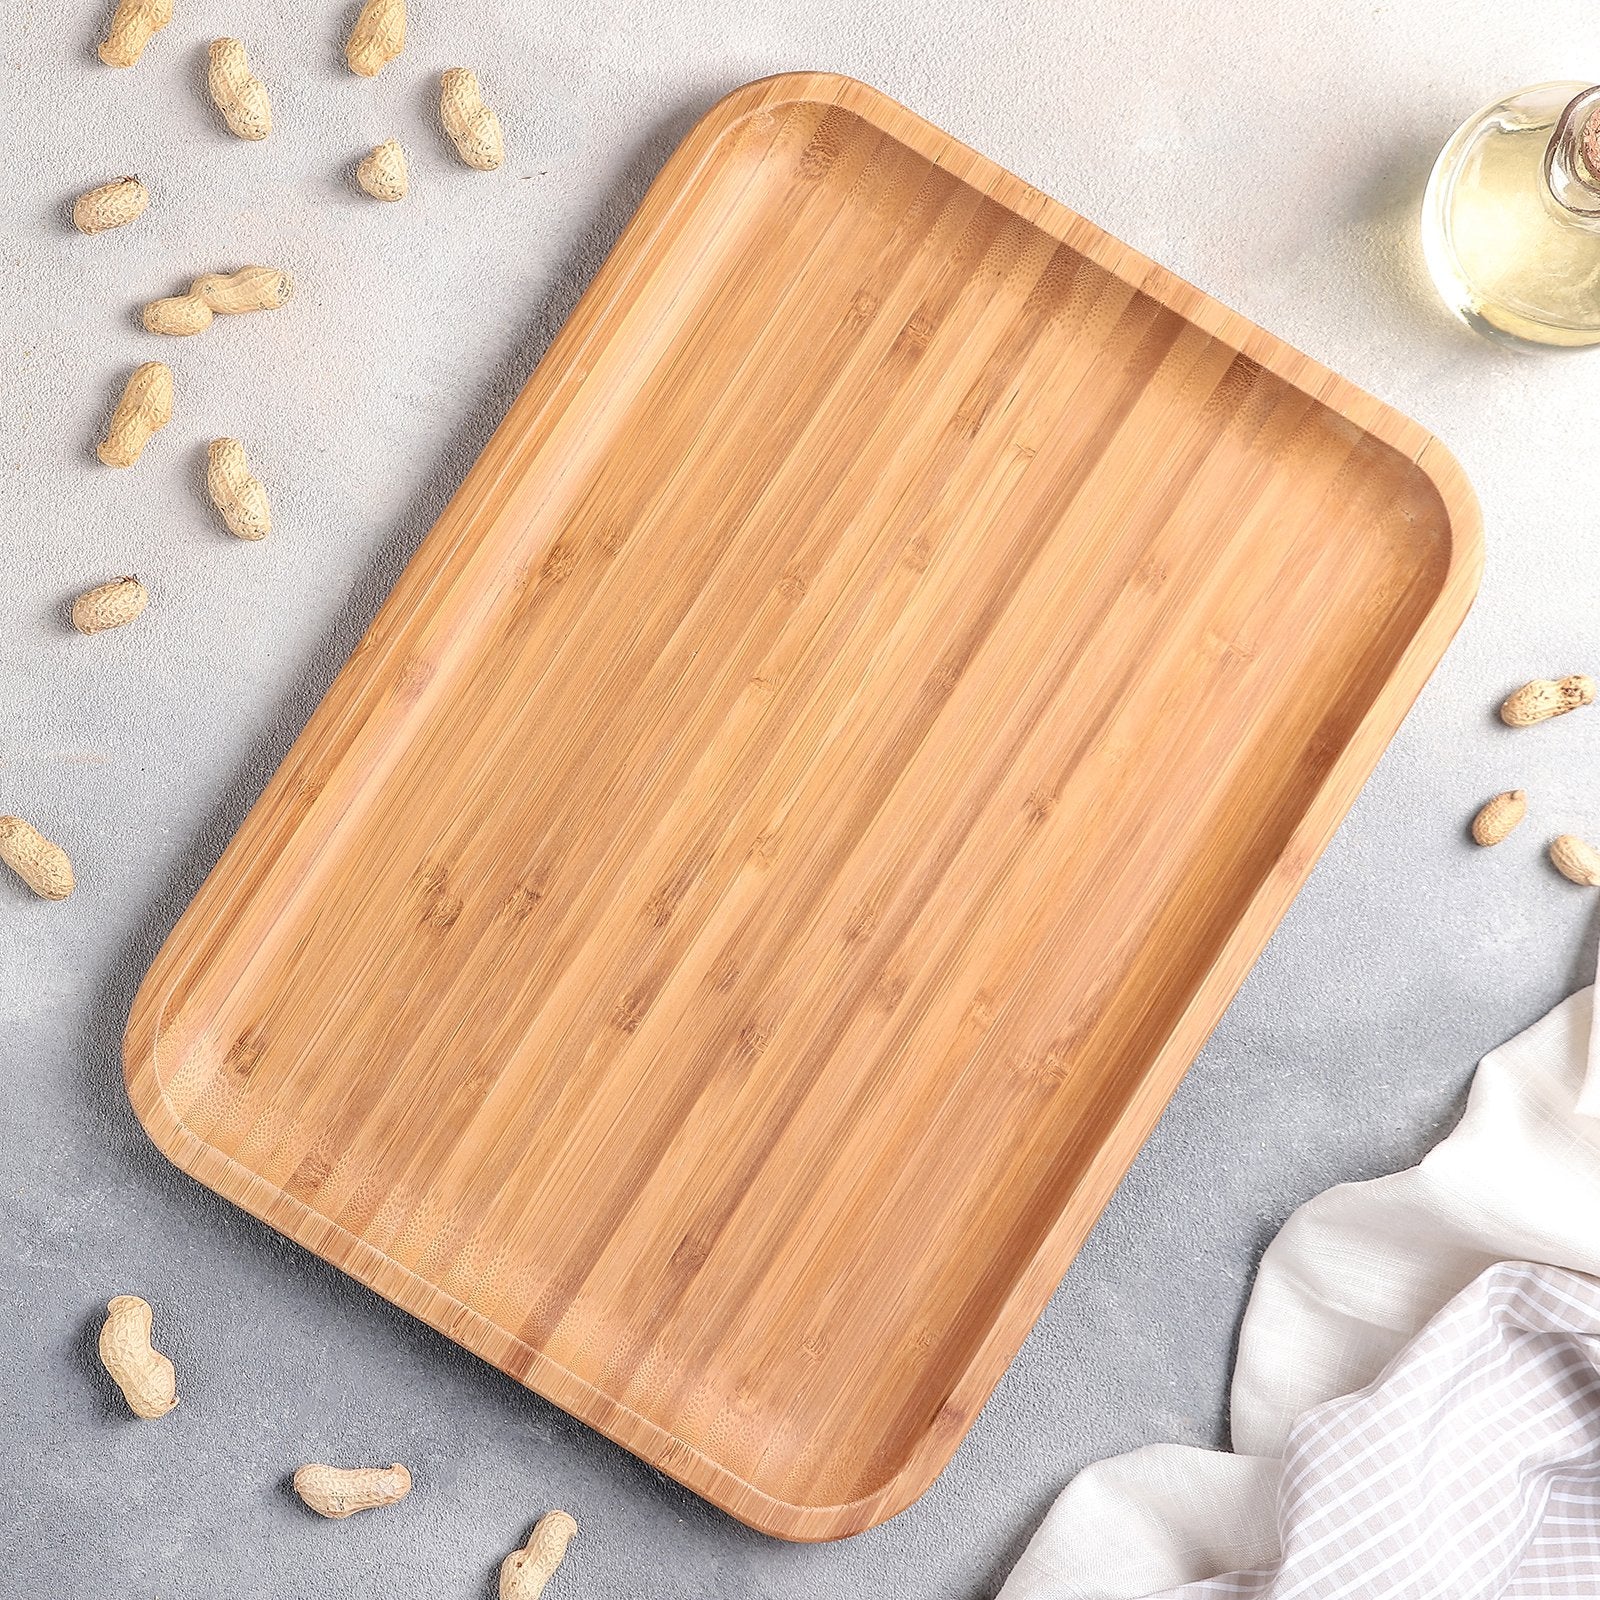 Bamboo Platter 14" inch X 10" inch | For Appetizers / Barbecue / Steak